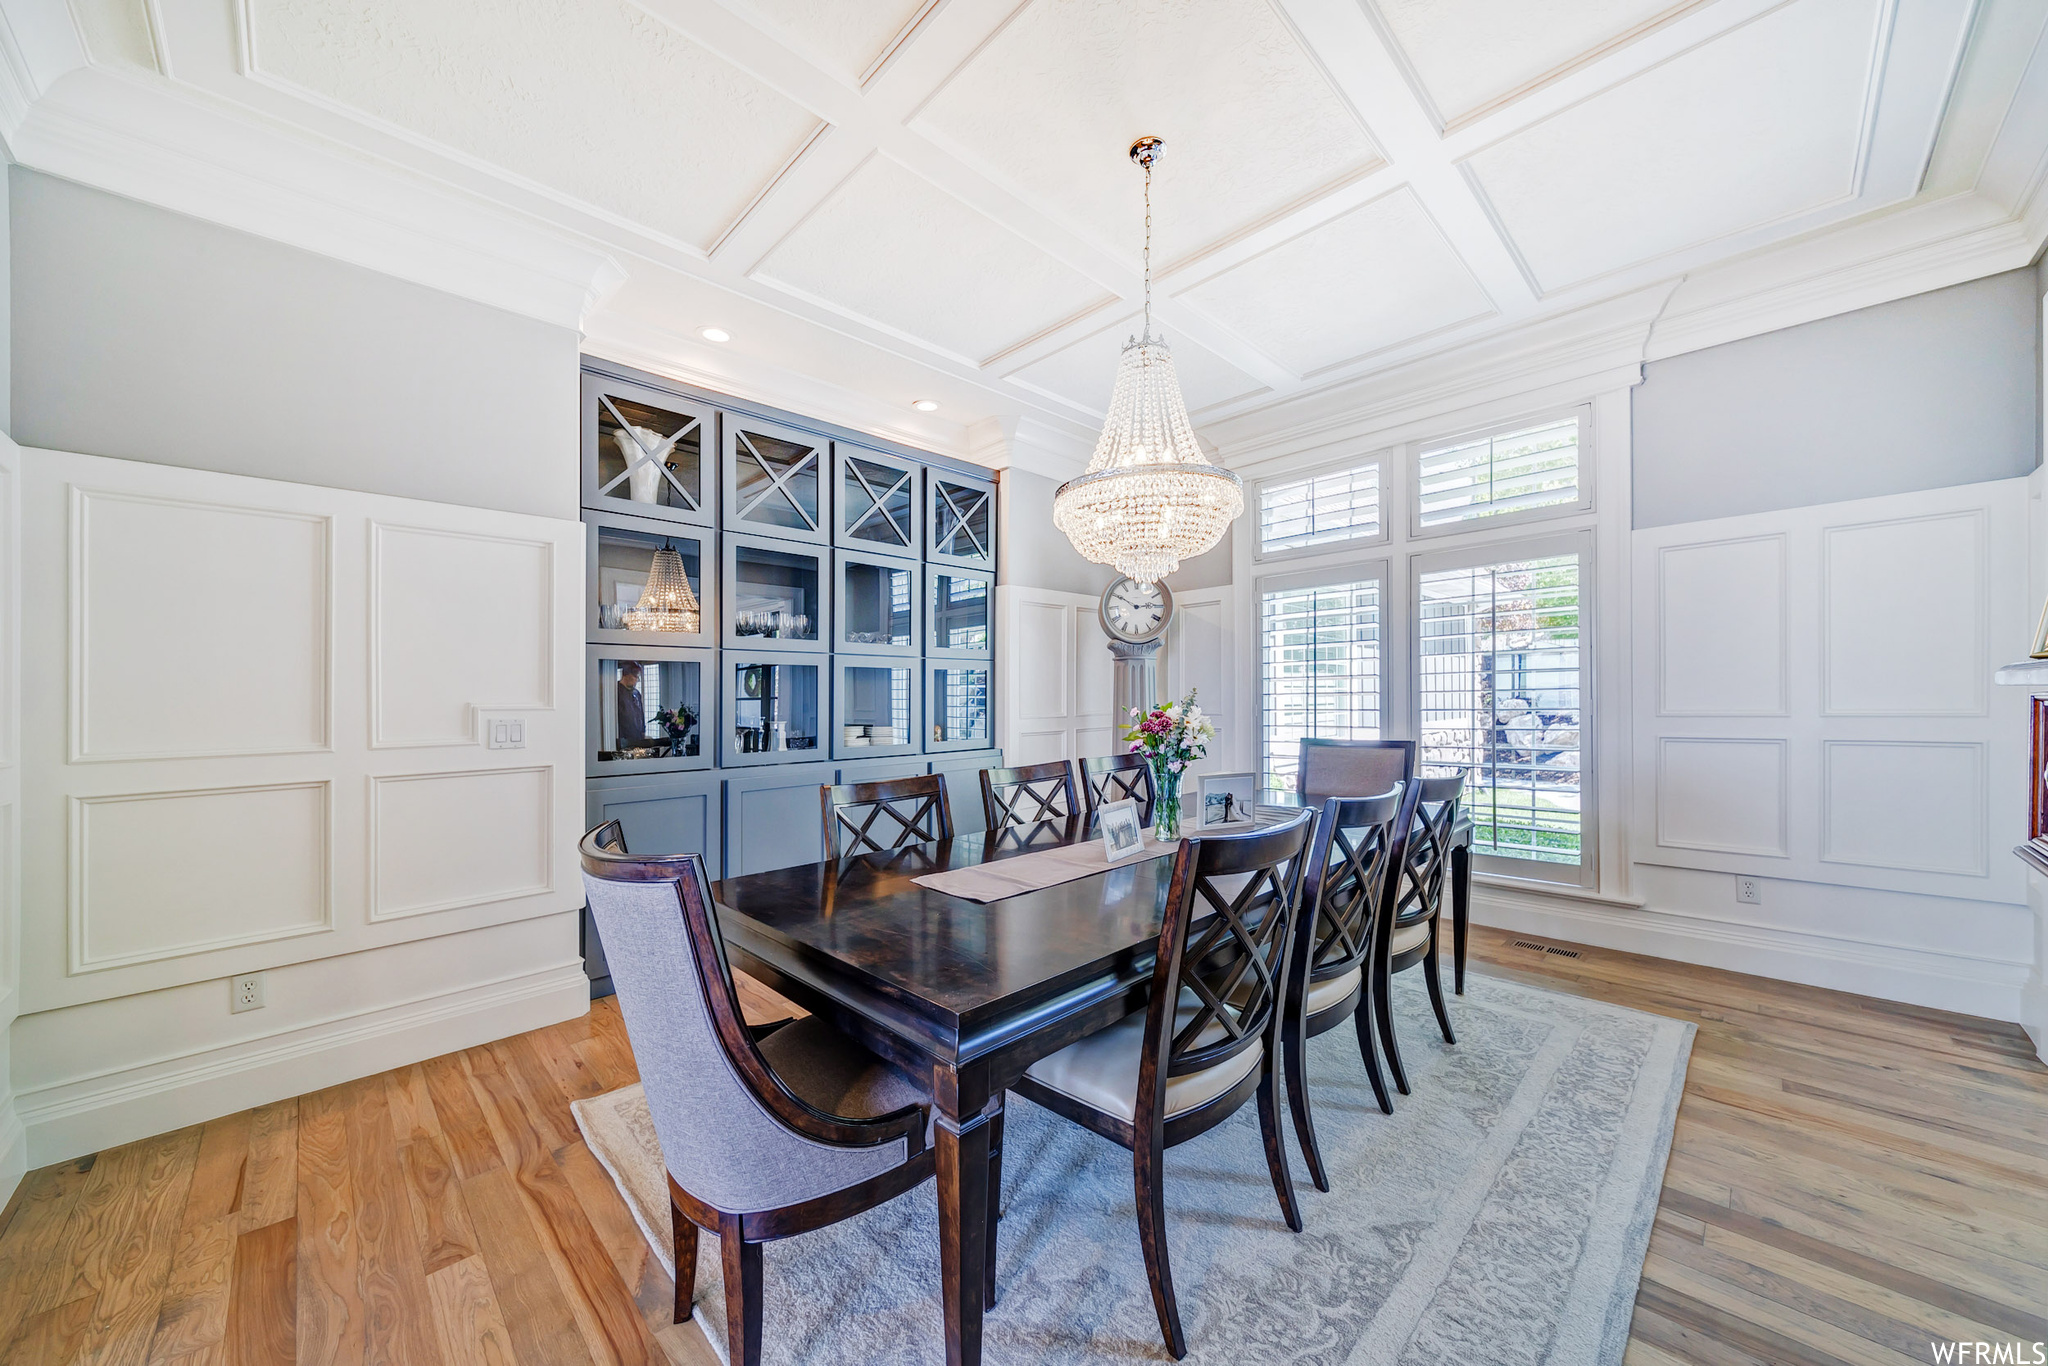 Formal dining room with coffered ceiling and light hardwood floors.